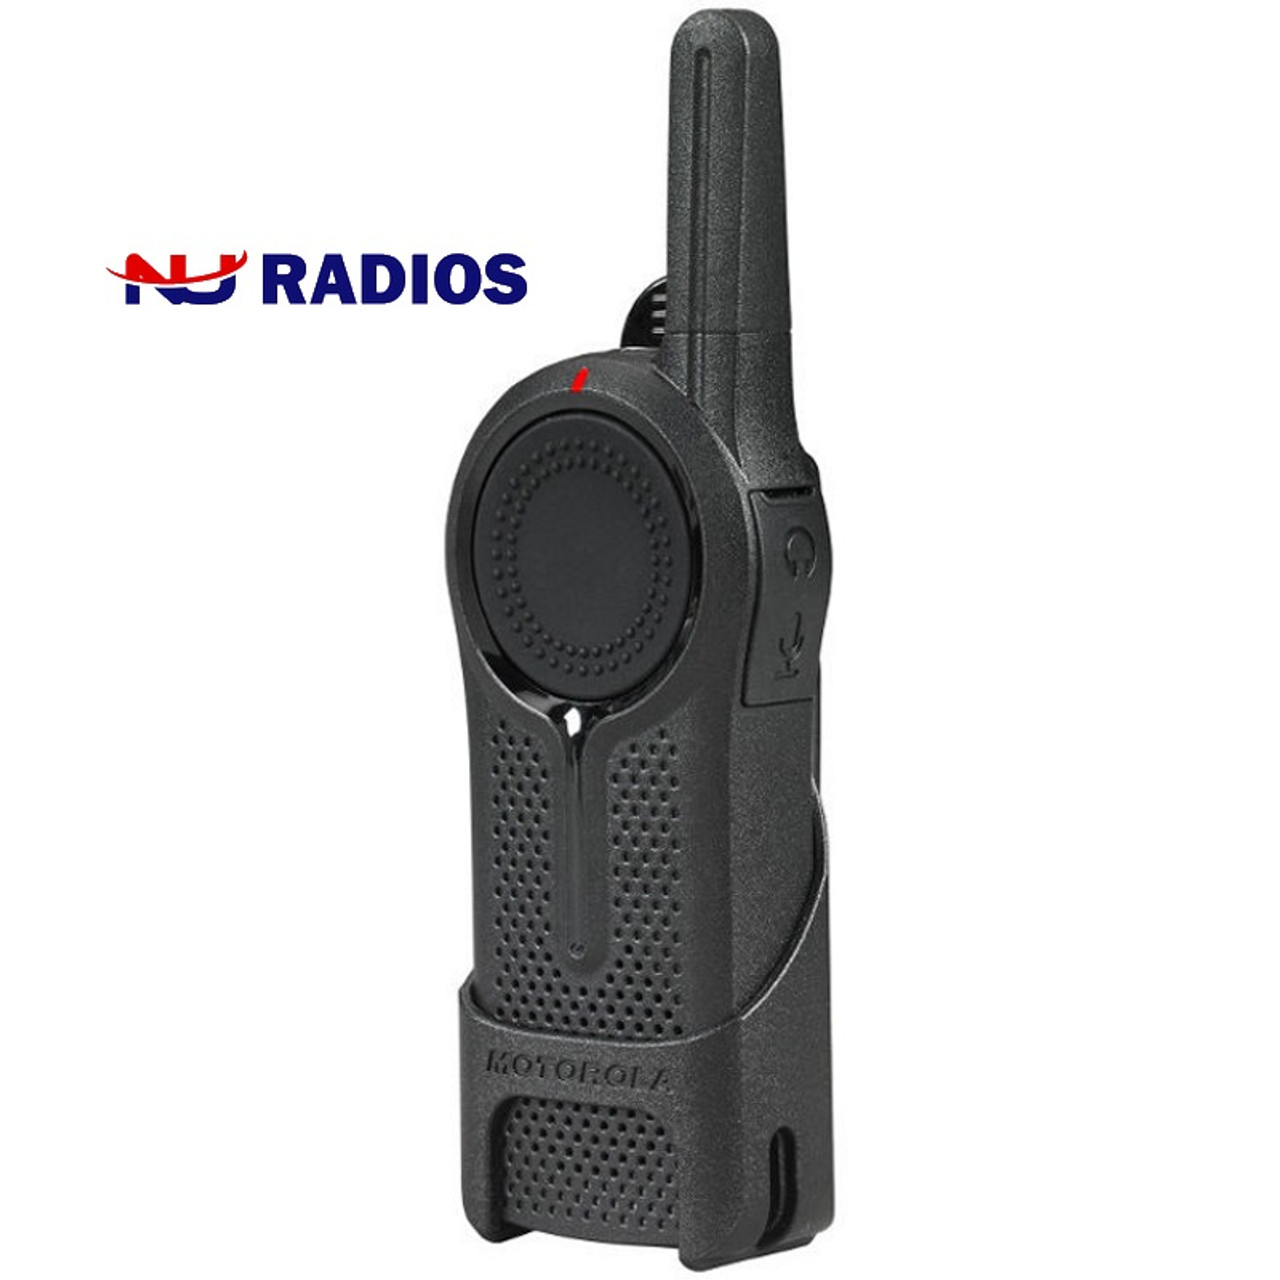 Motorola 6-Pack of DLR1020 Digital Two Way Radios for business are a  LICENSE FREE walkie talkie that includes a holster, battery and AC charger.